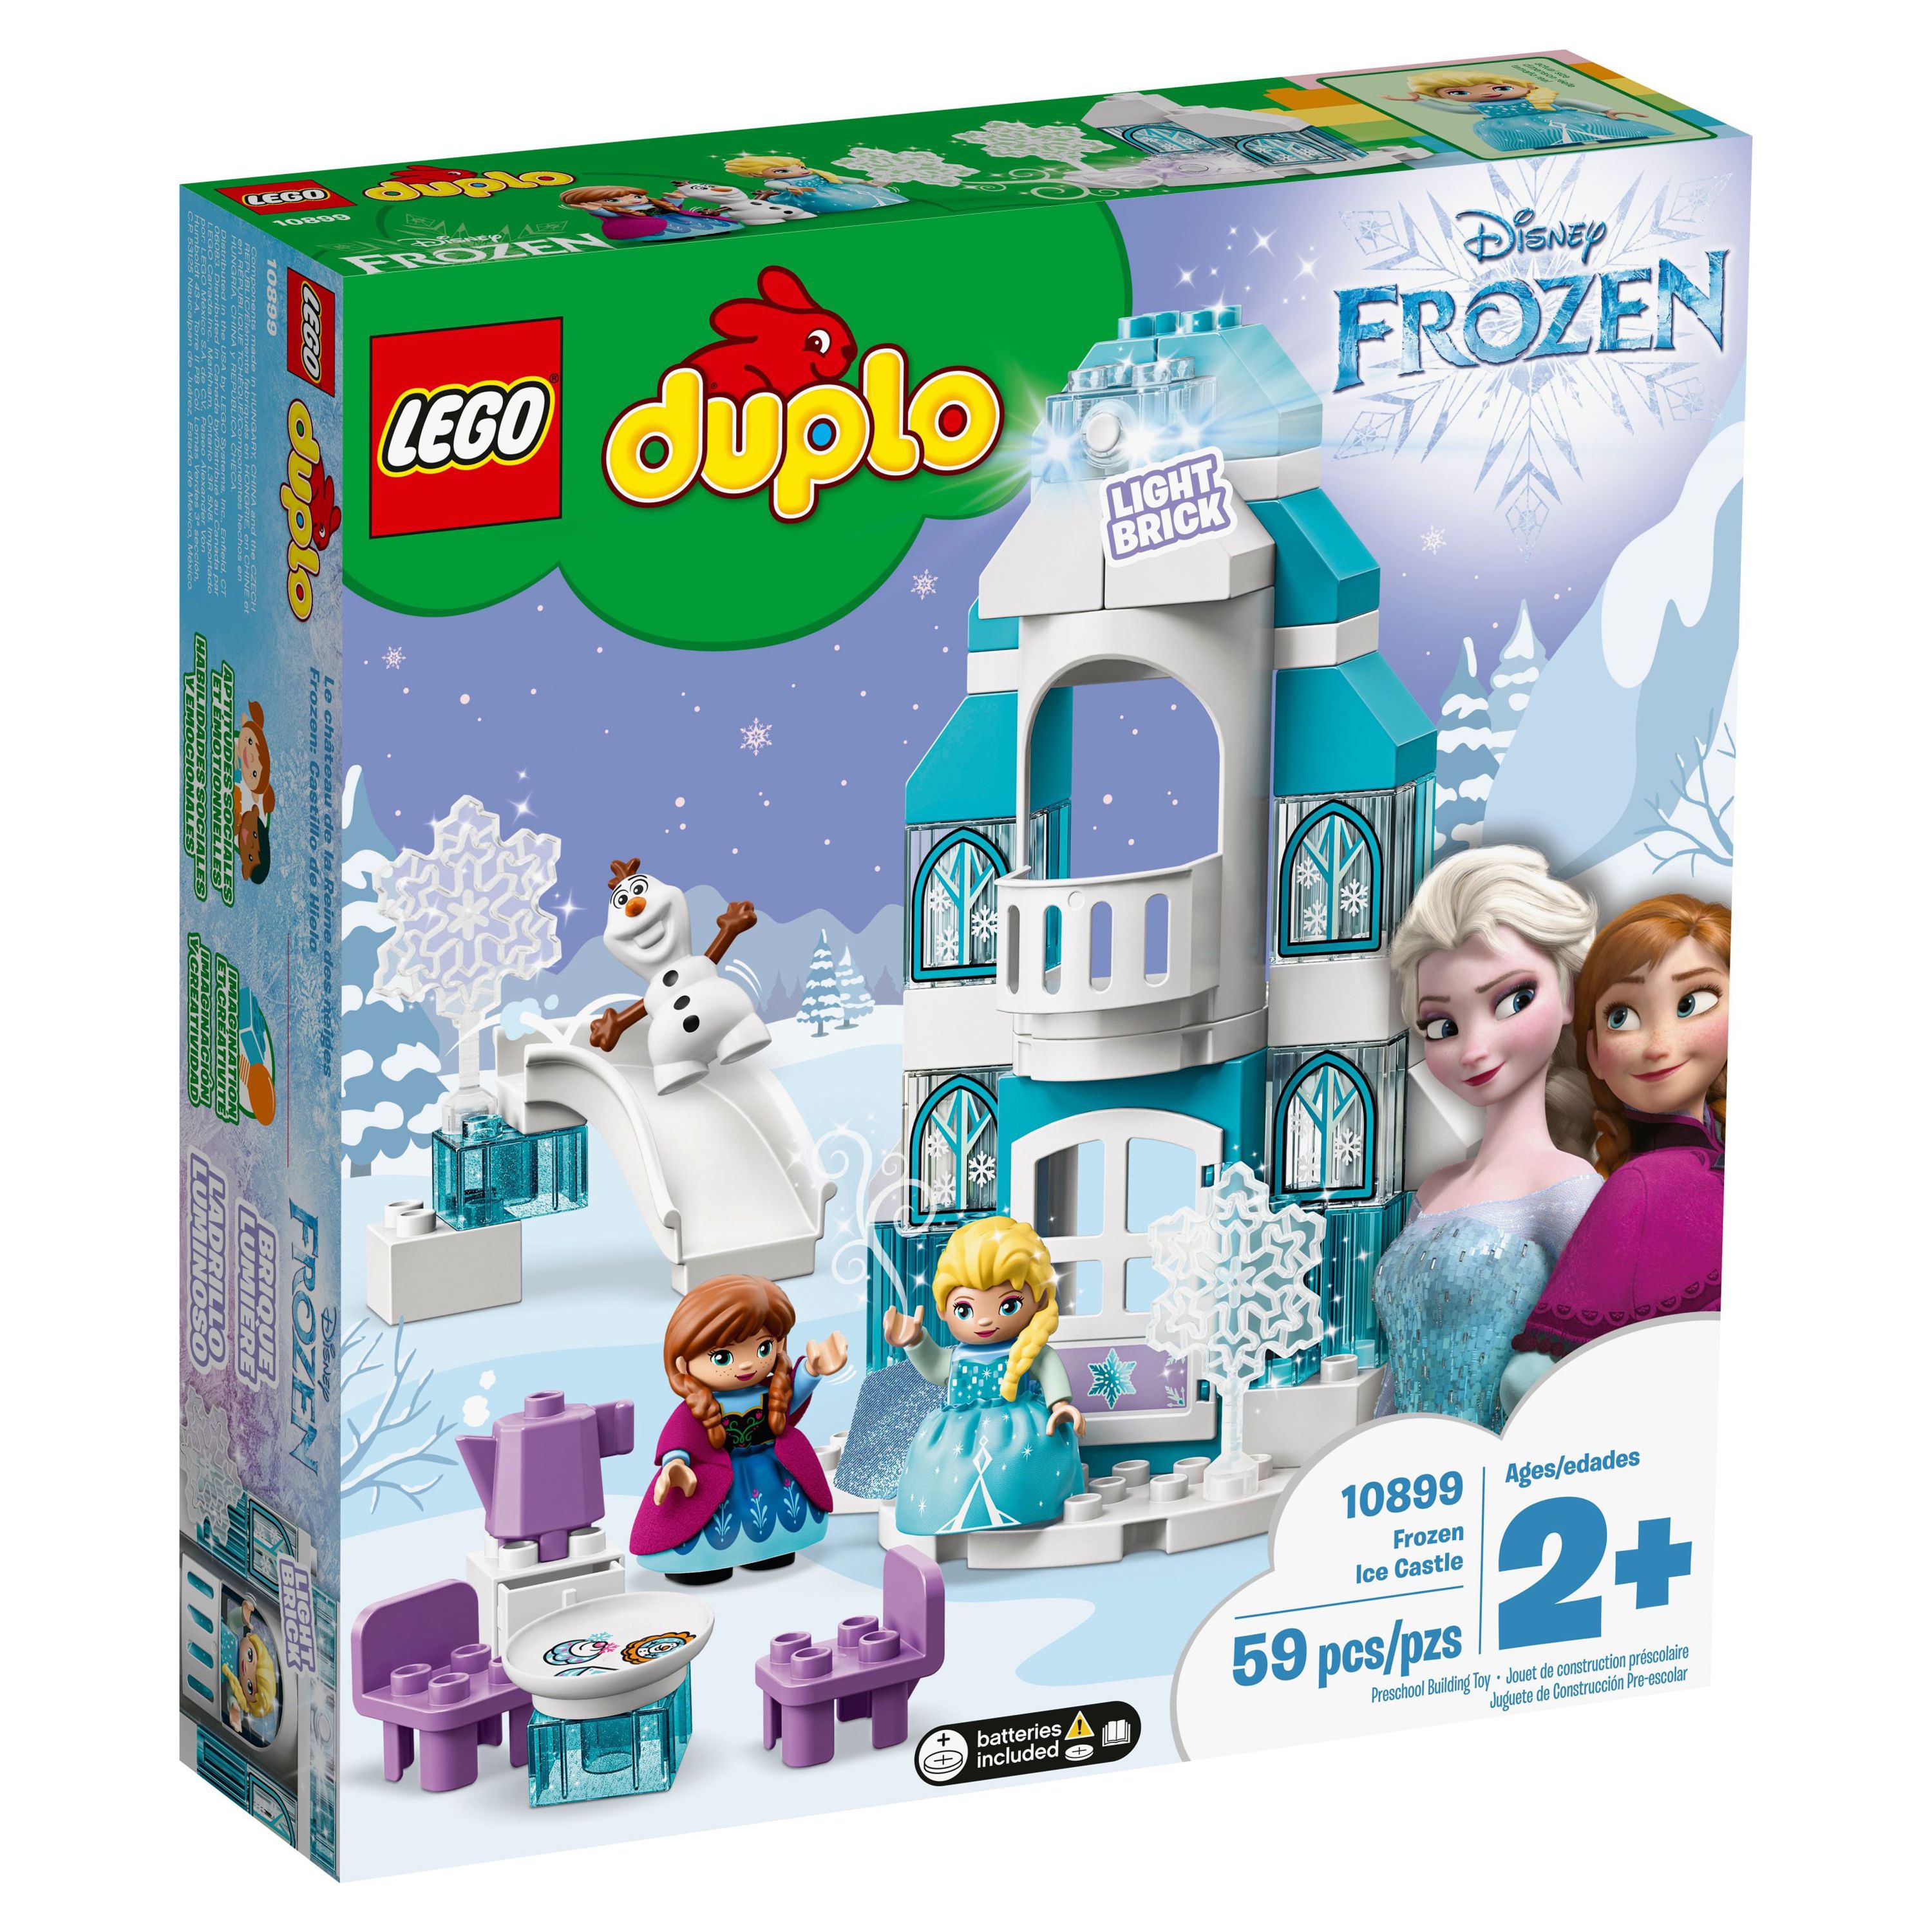 LEGO DUPLO Disney Princess Frozen Ice Castle 10899 Building Toy with Light Brick, Princess Elsa and Anna Mini-Dolls plus Olaf Figure, Gifts for 2 Year Old Toddlers, Girls & Boys - image 3 of 3